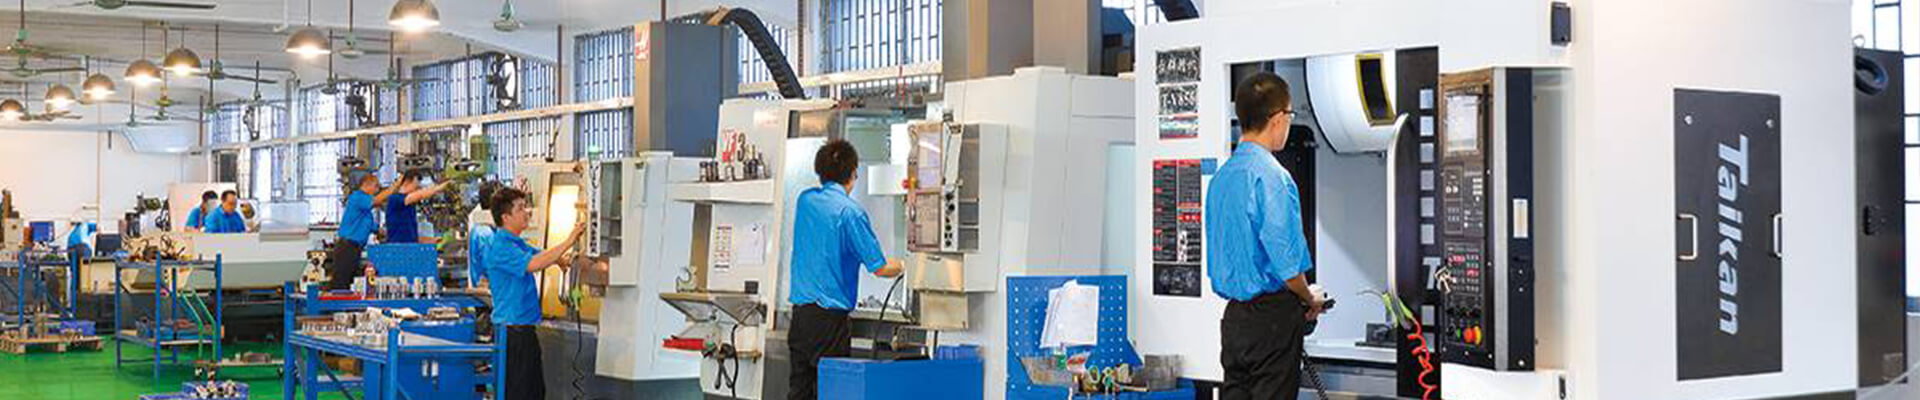 Find Professional CNC Machining CNC Milling CNC Cutting Service From Marchton automation